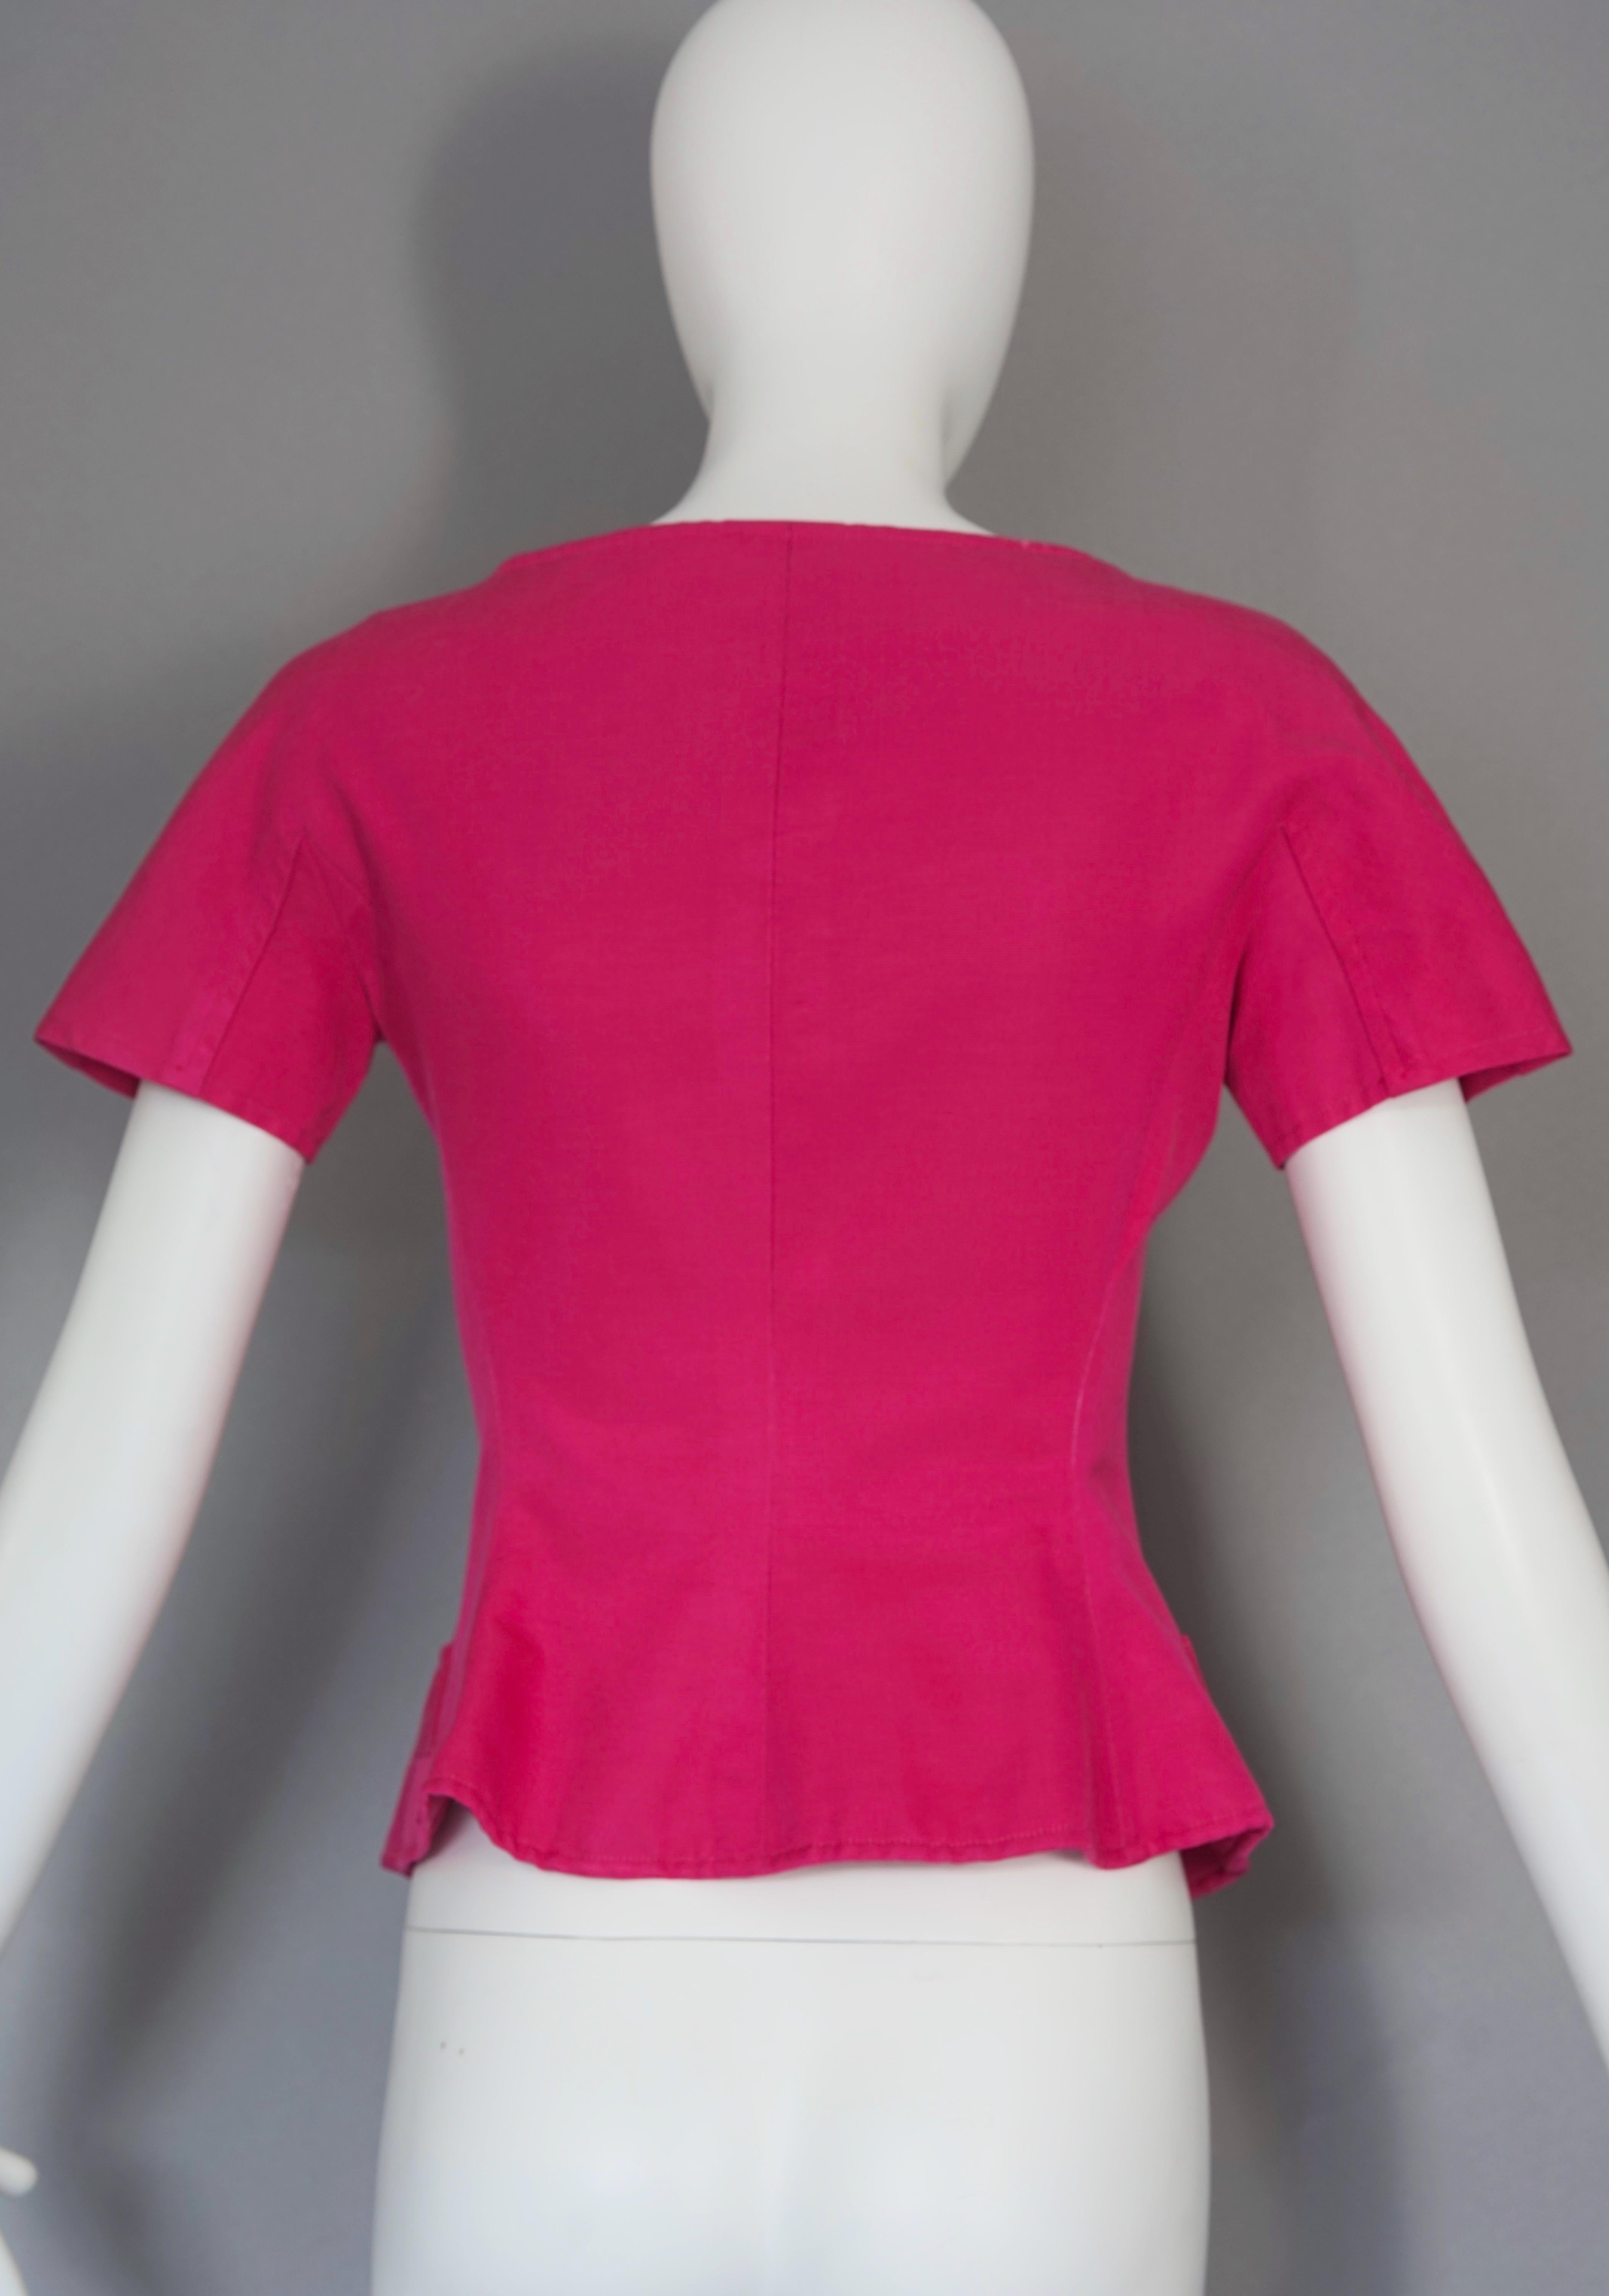 Vintage CRISTIAN LACROIX Jewelled Fuchsia Pink Blouse Top For Sale 1